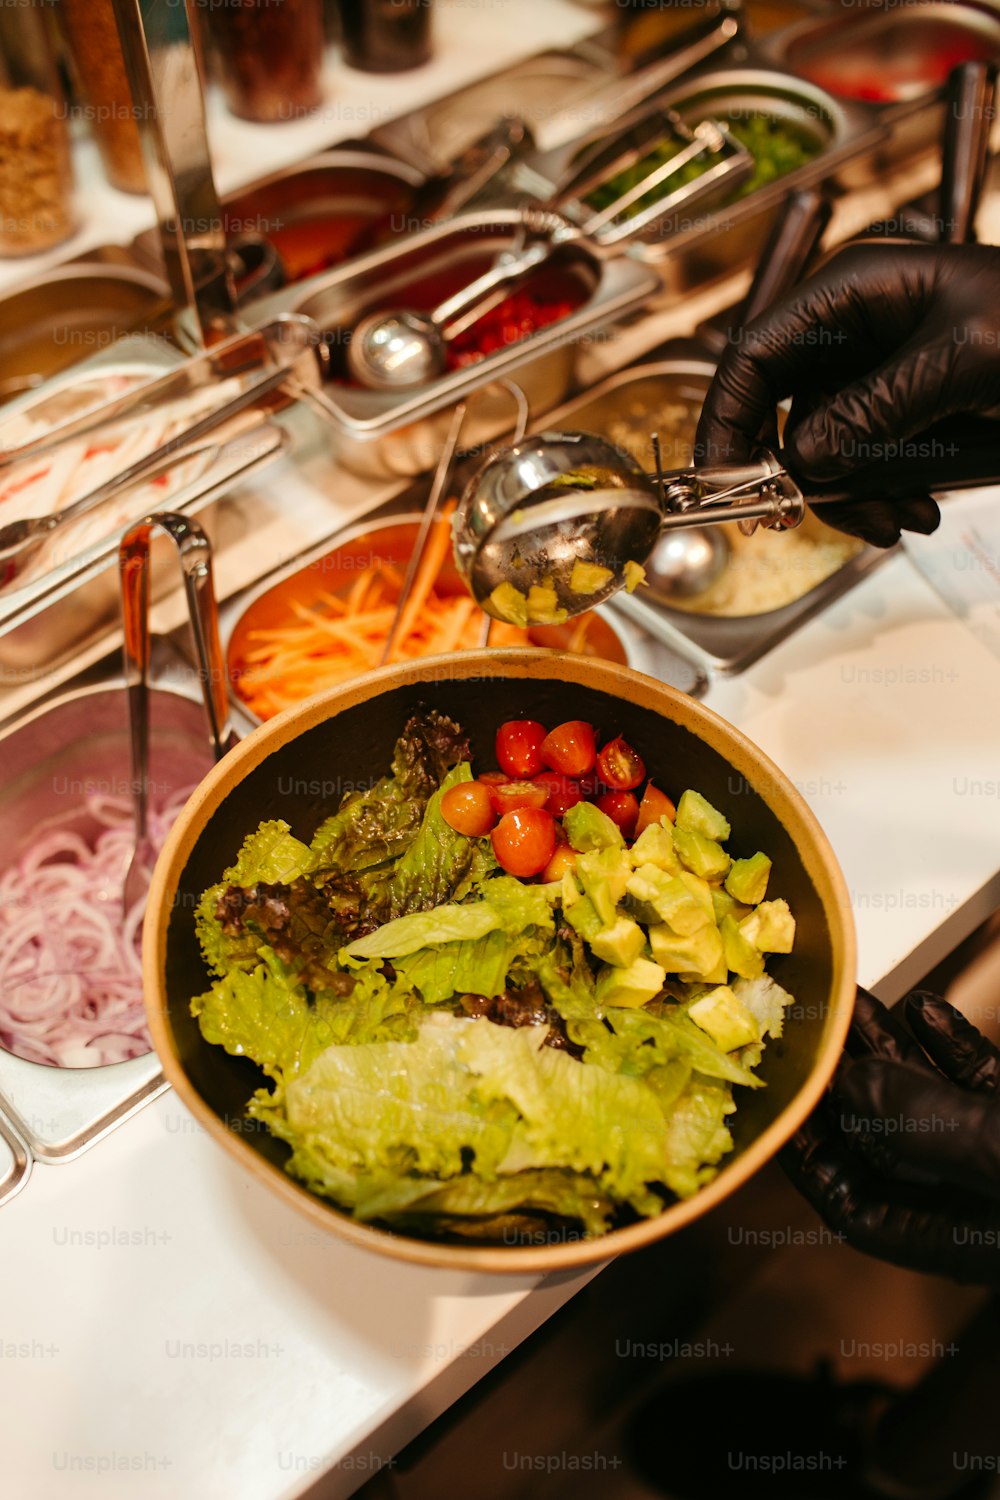 a person in black gloves is serving a salad